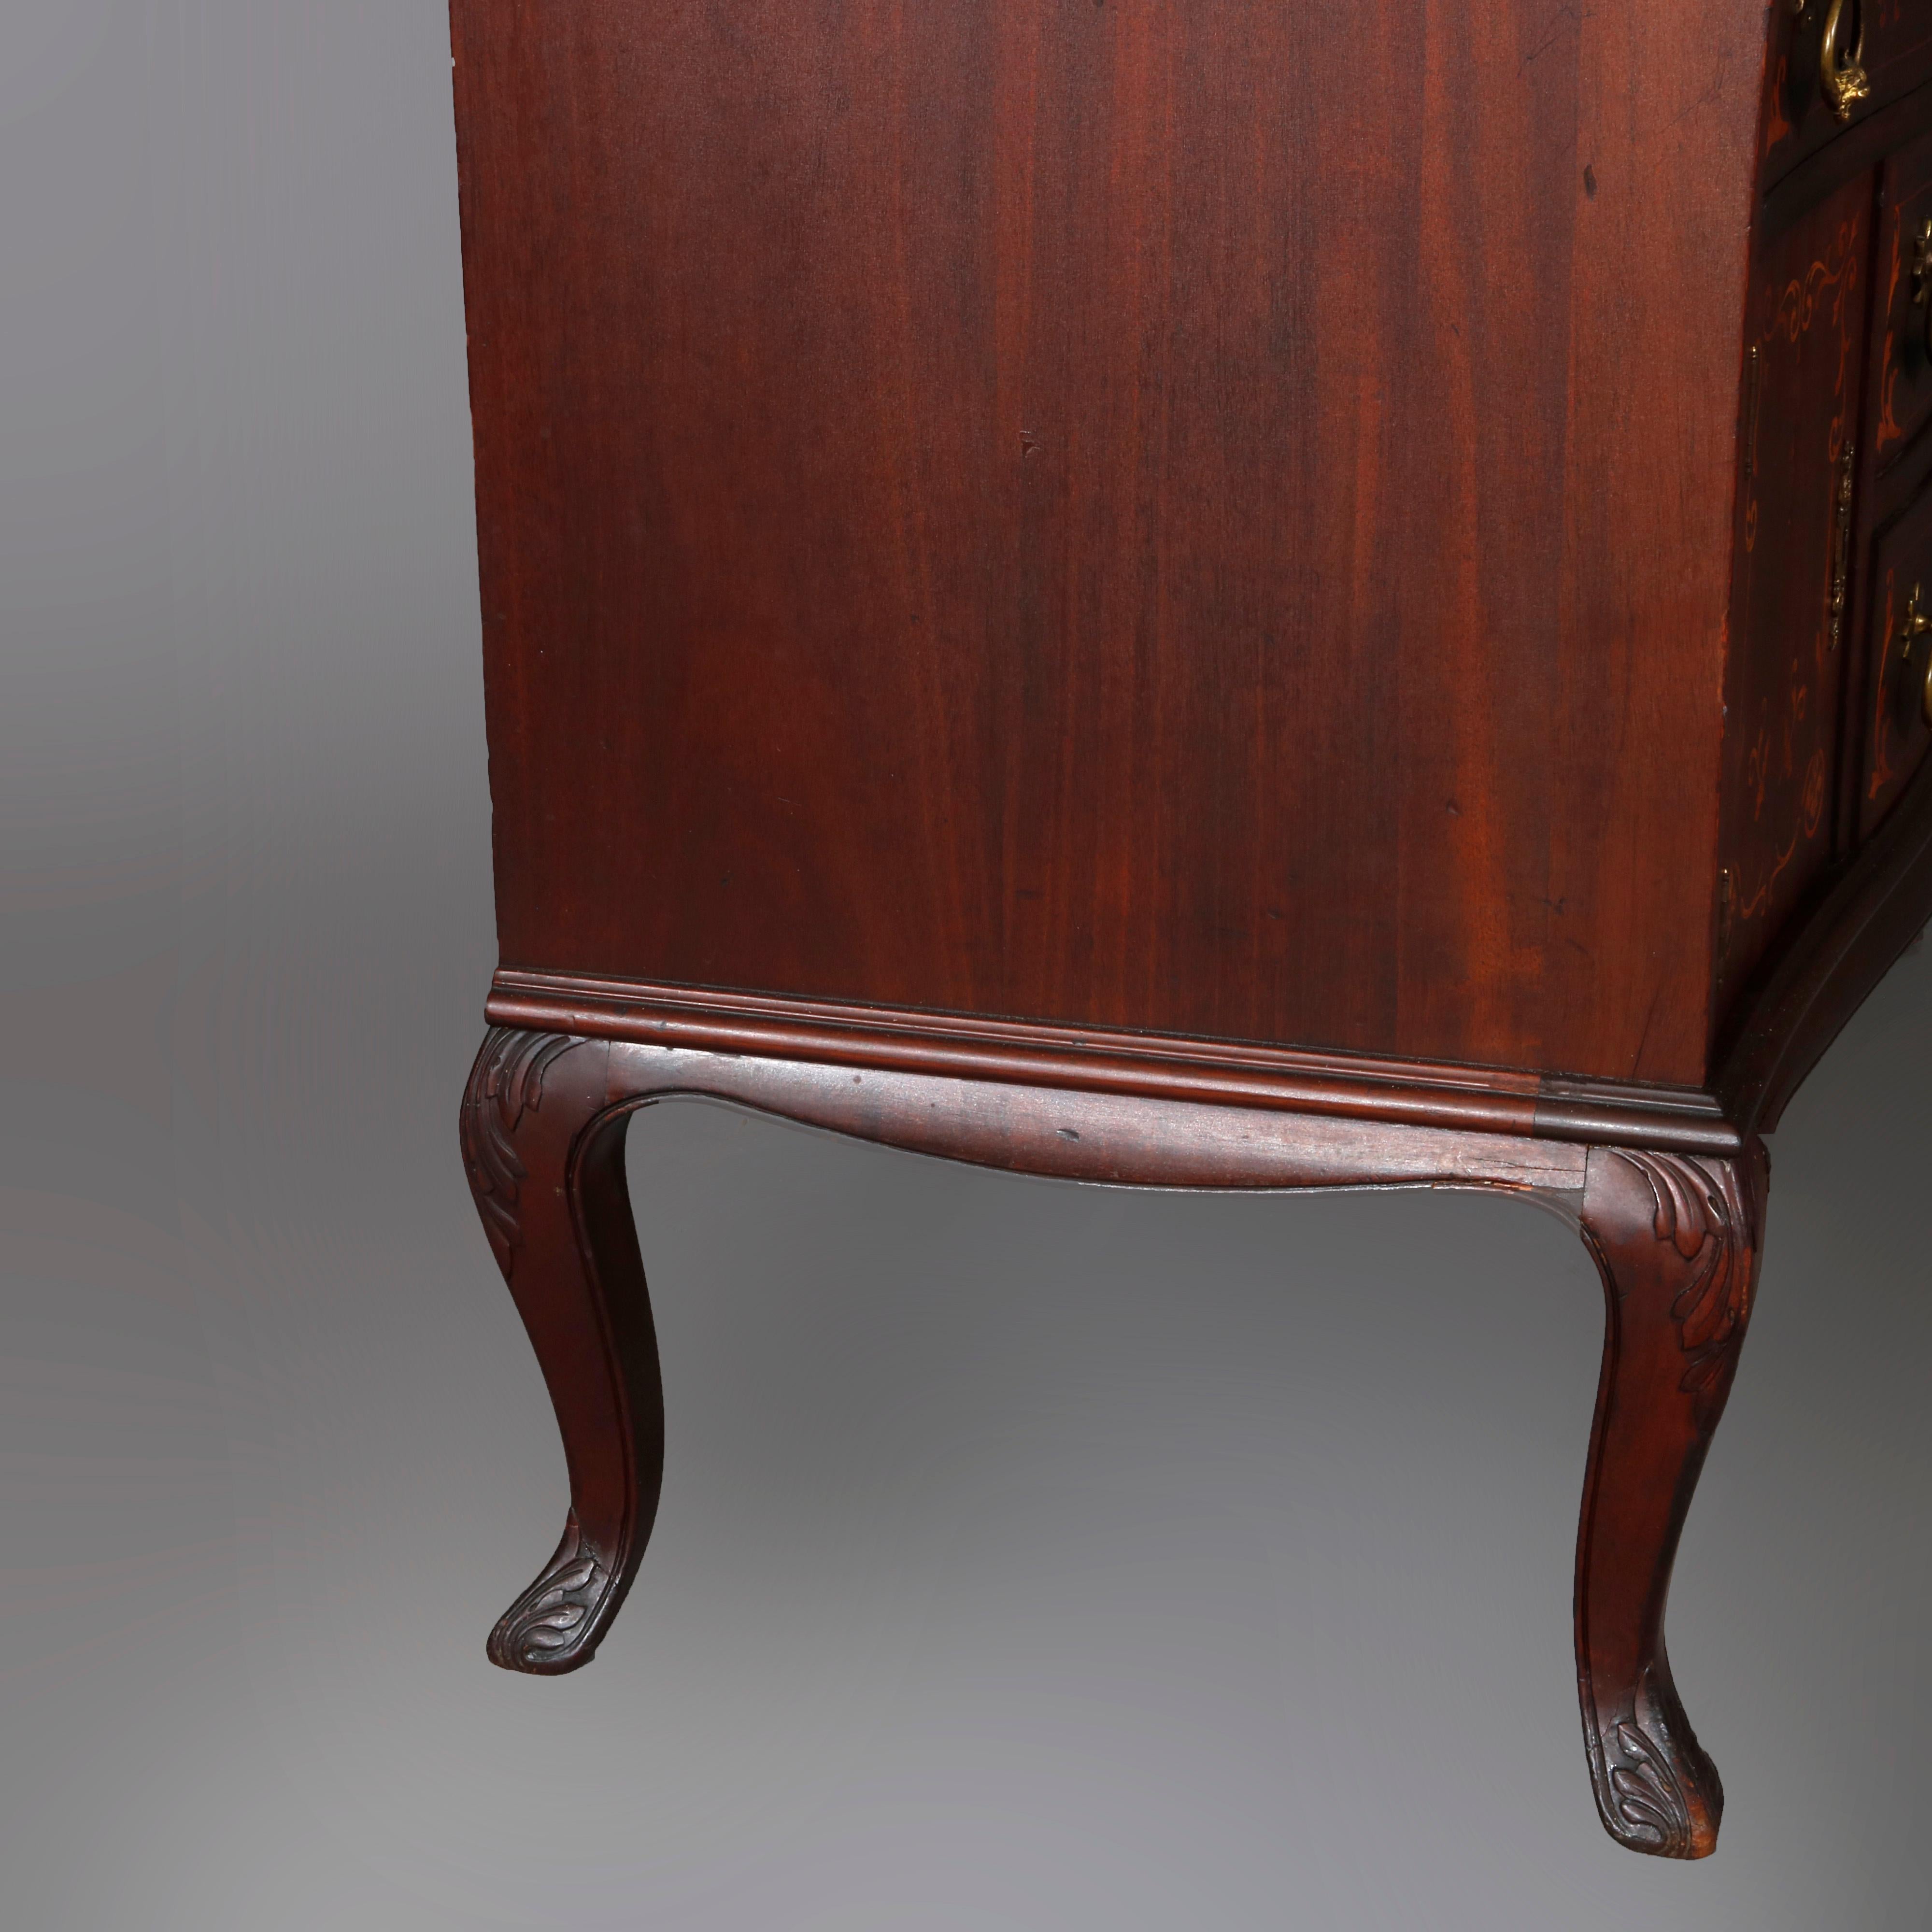 French RJ Horner Style Mahogany and Satinwood Inlaid Drop Front Desk, circa 1900 13